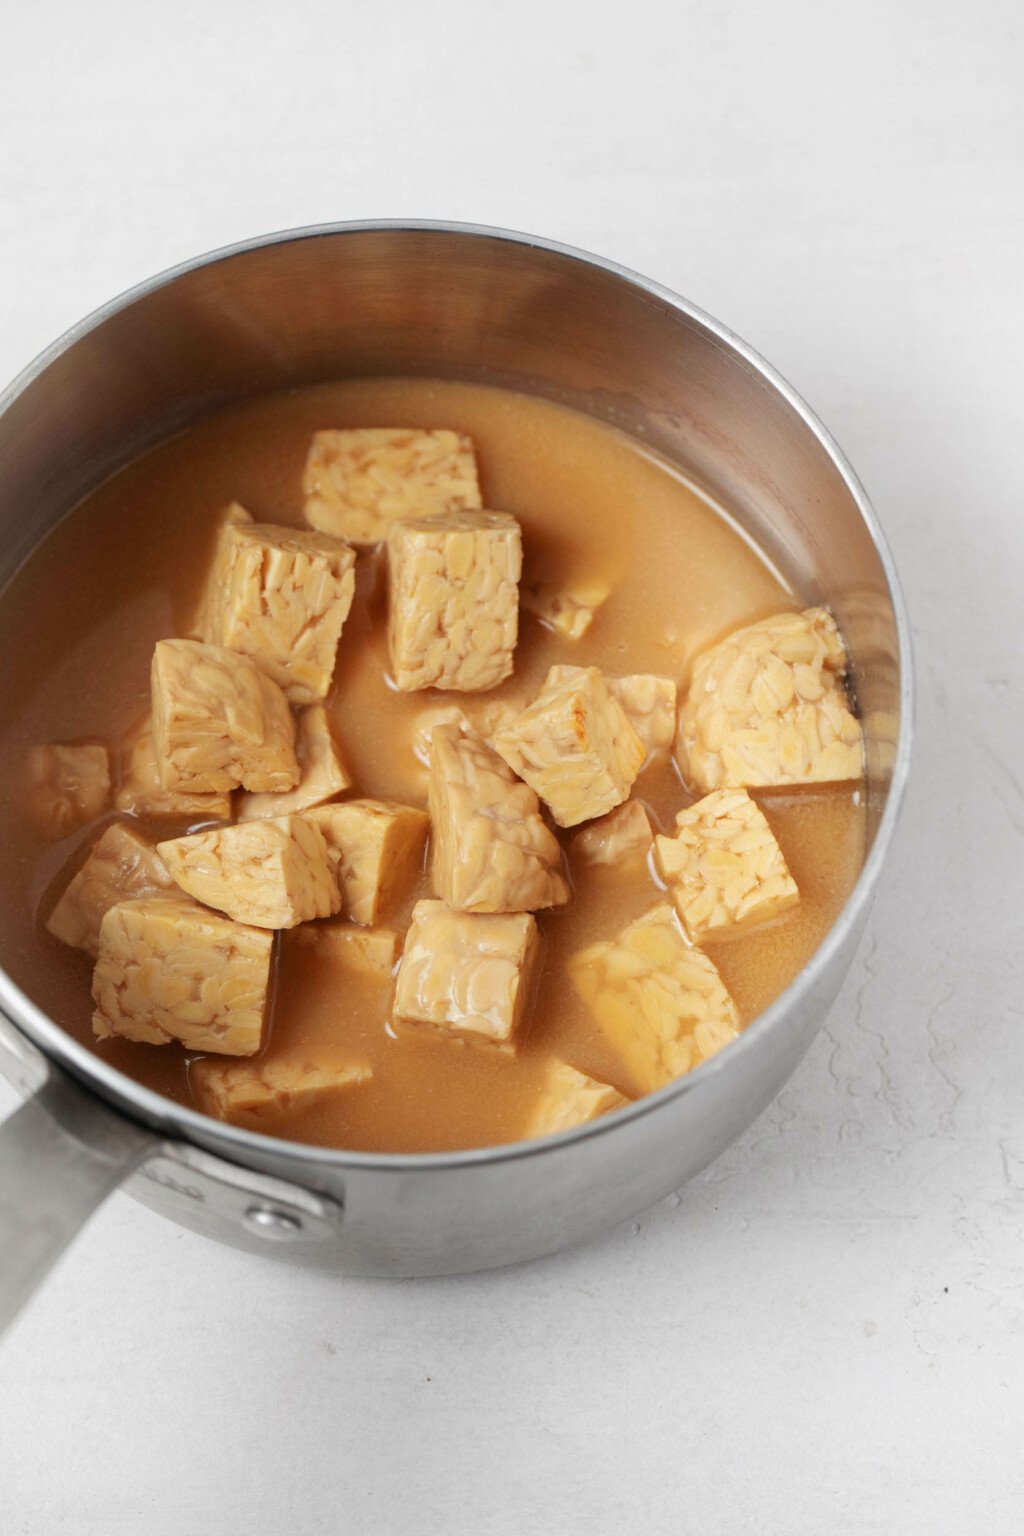 Tempeh and broth are simmering in a small saucepan.